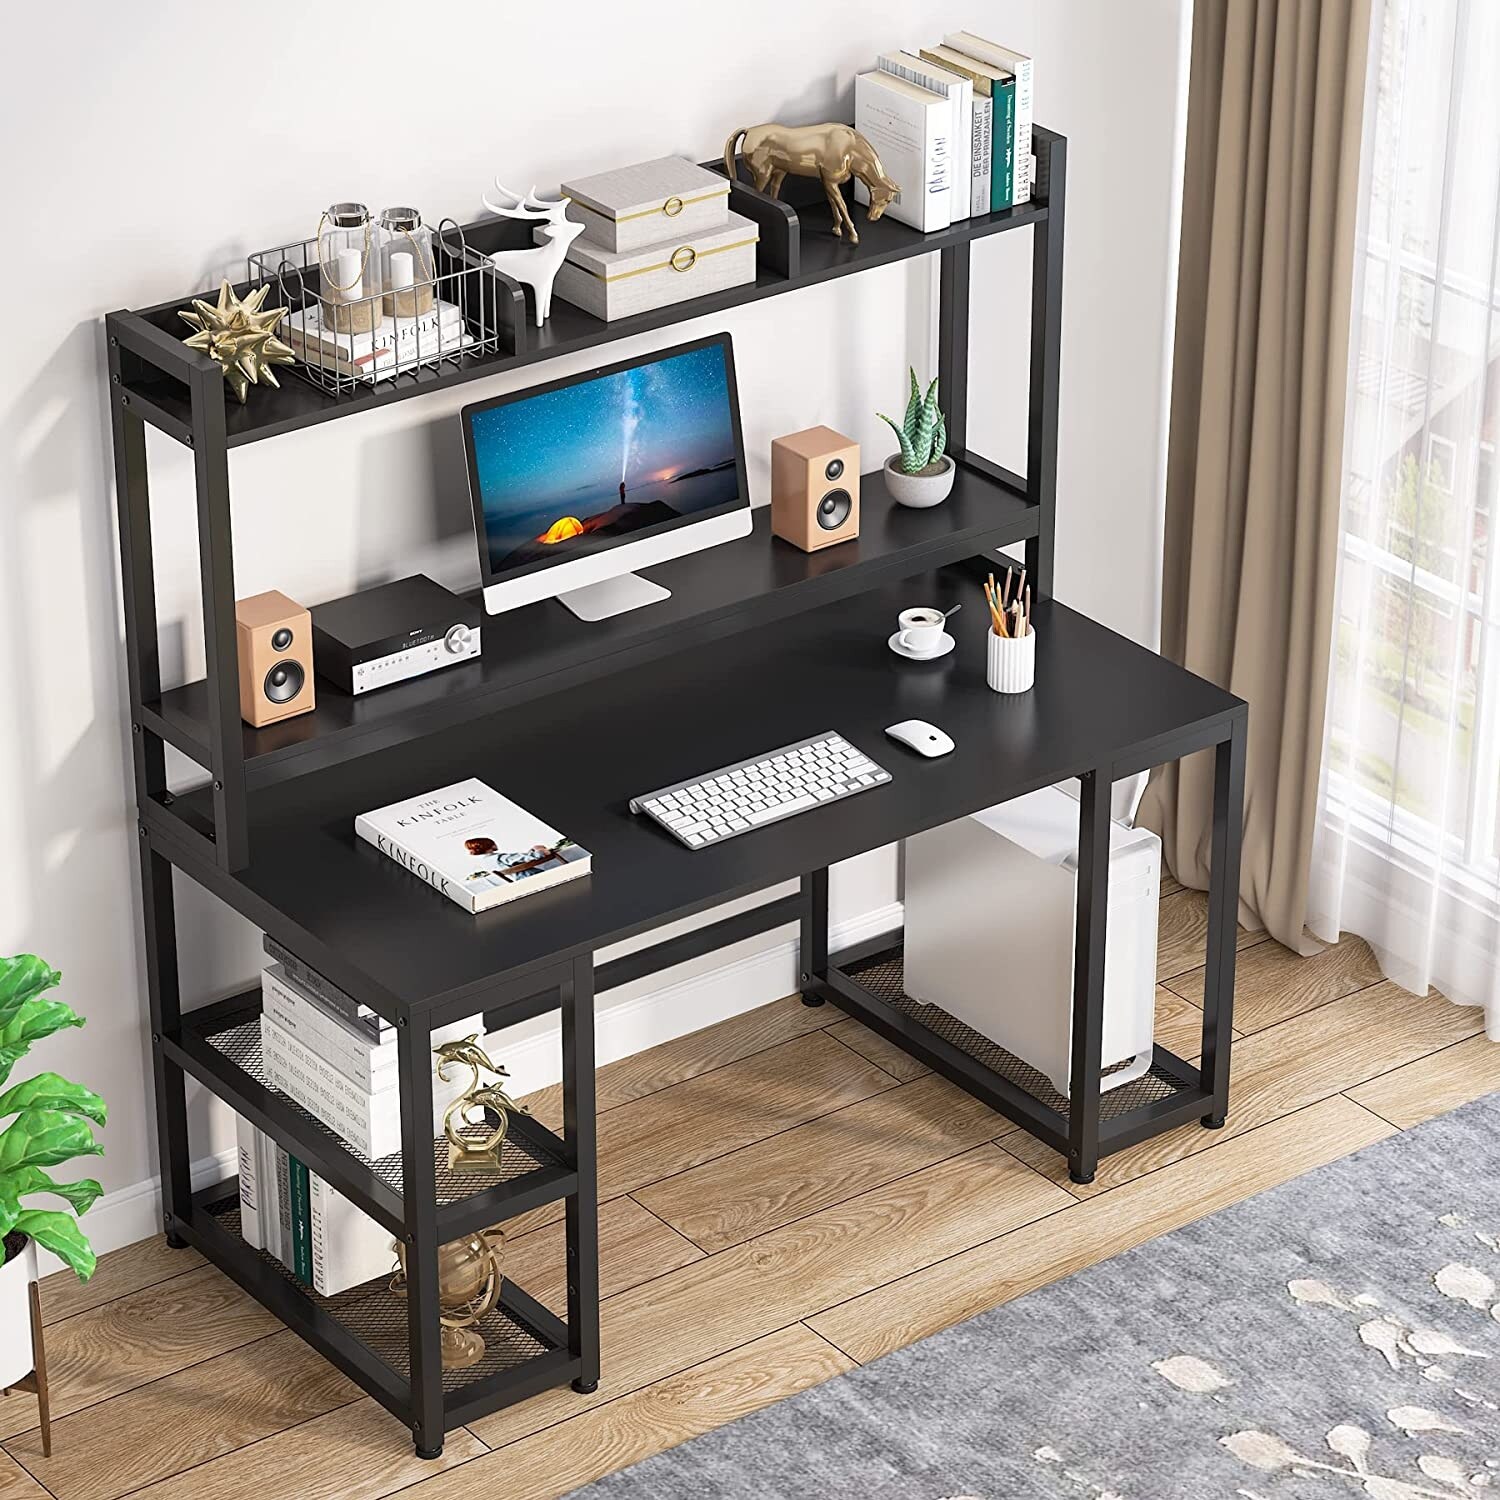 https://ak1.ostkcdn.com/images/products/is/images/direct/a7735a293a4dbd46b92726c4b757c0148ac50265/Computer-Desk-with-Hutch-and-Monitor-Stand-Riser%2C-Rustic-Industrial-Desk-Computer-Table-Studying-Writing-Desk.jpg